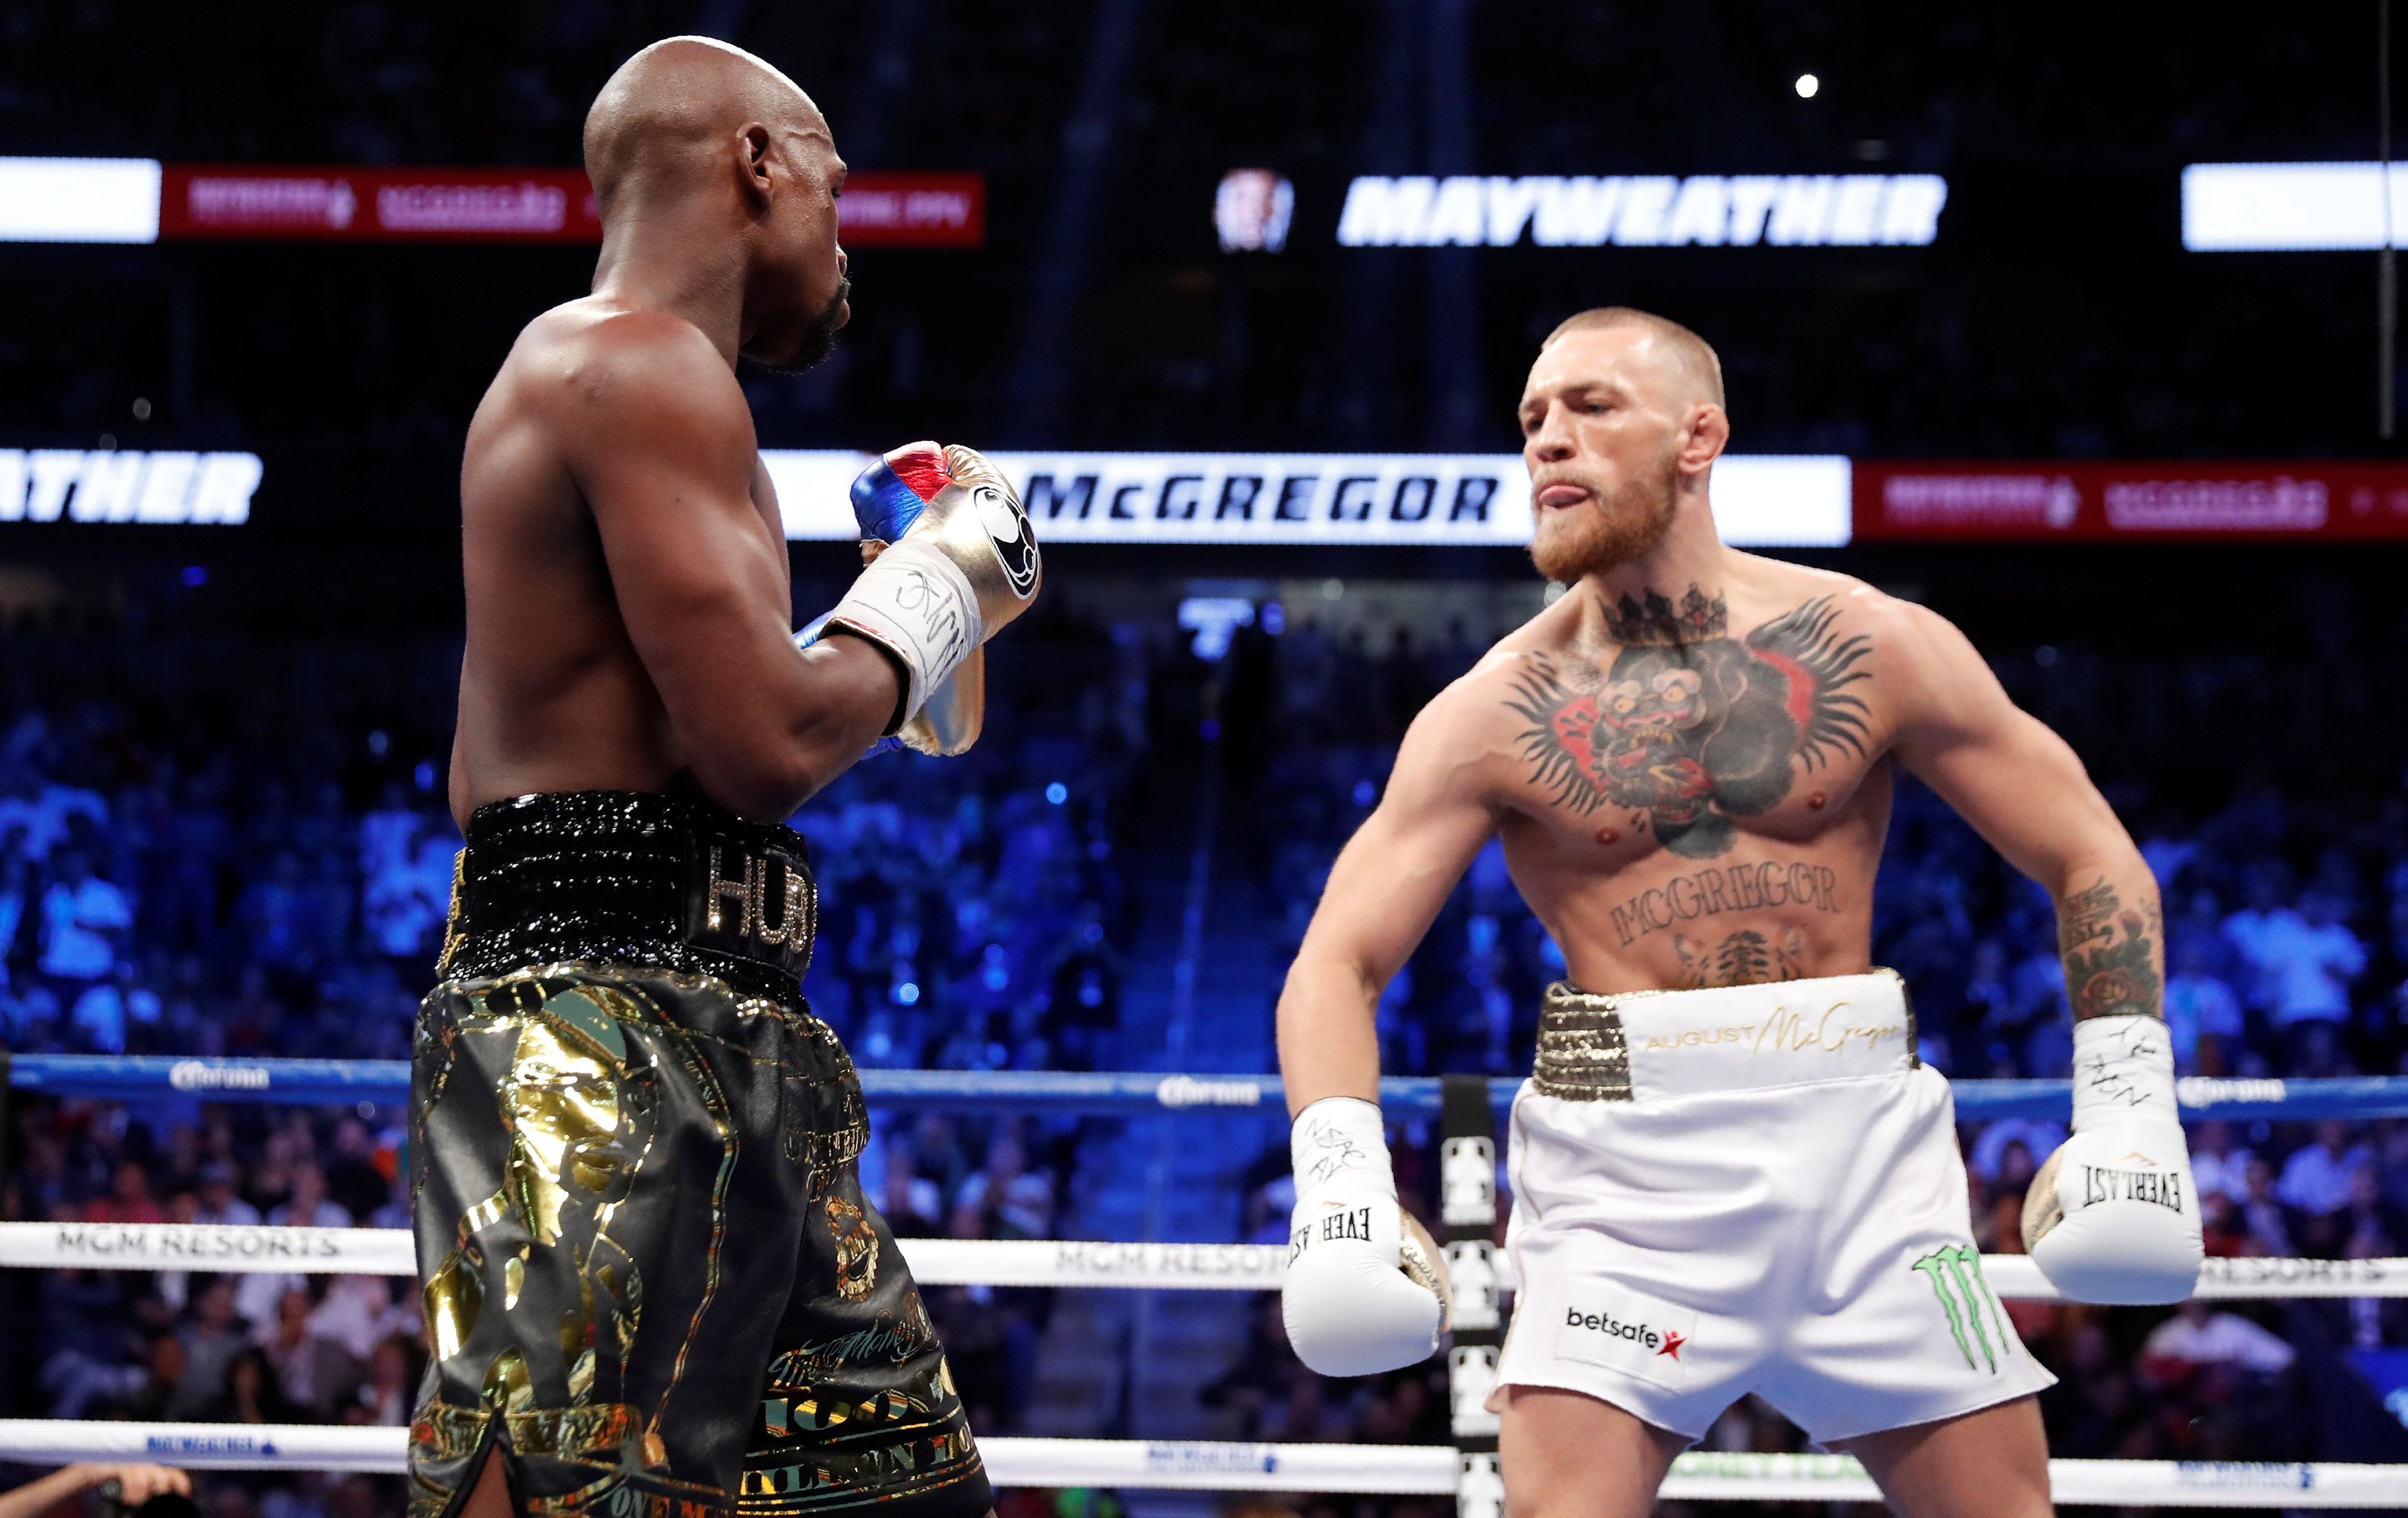 Conor McGregor and Floyd Mayweather locked horns with one another five years ago